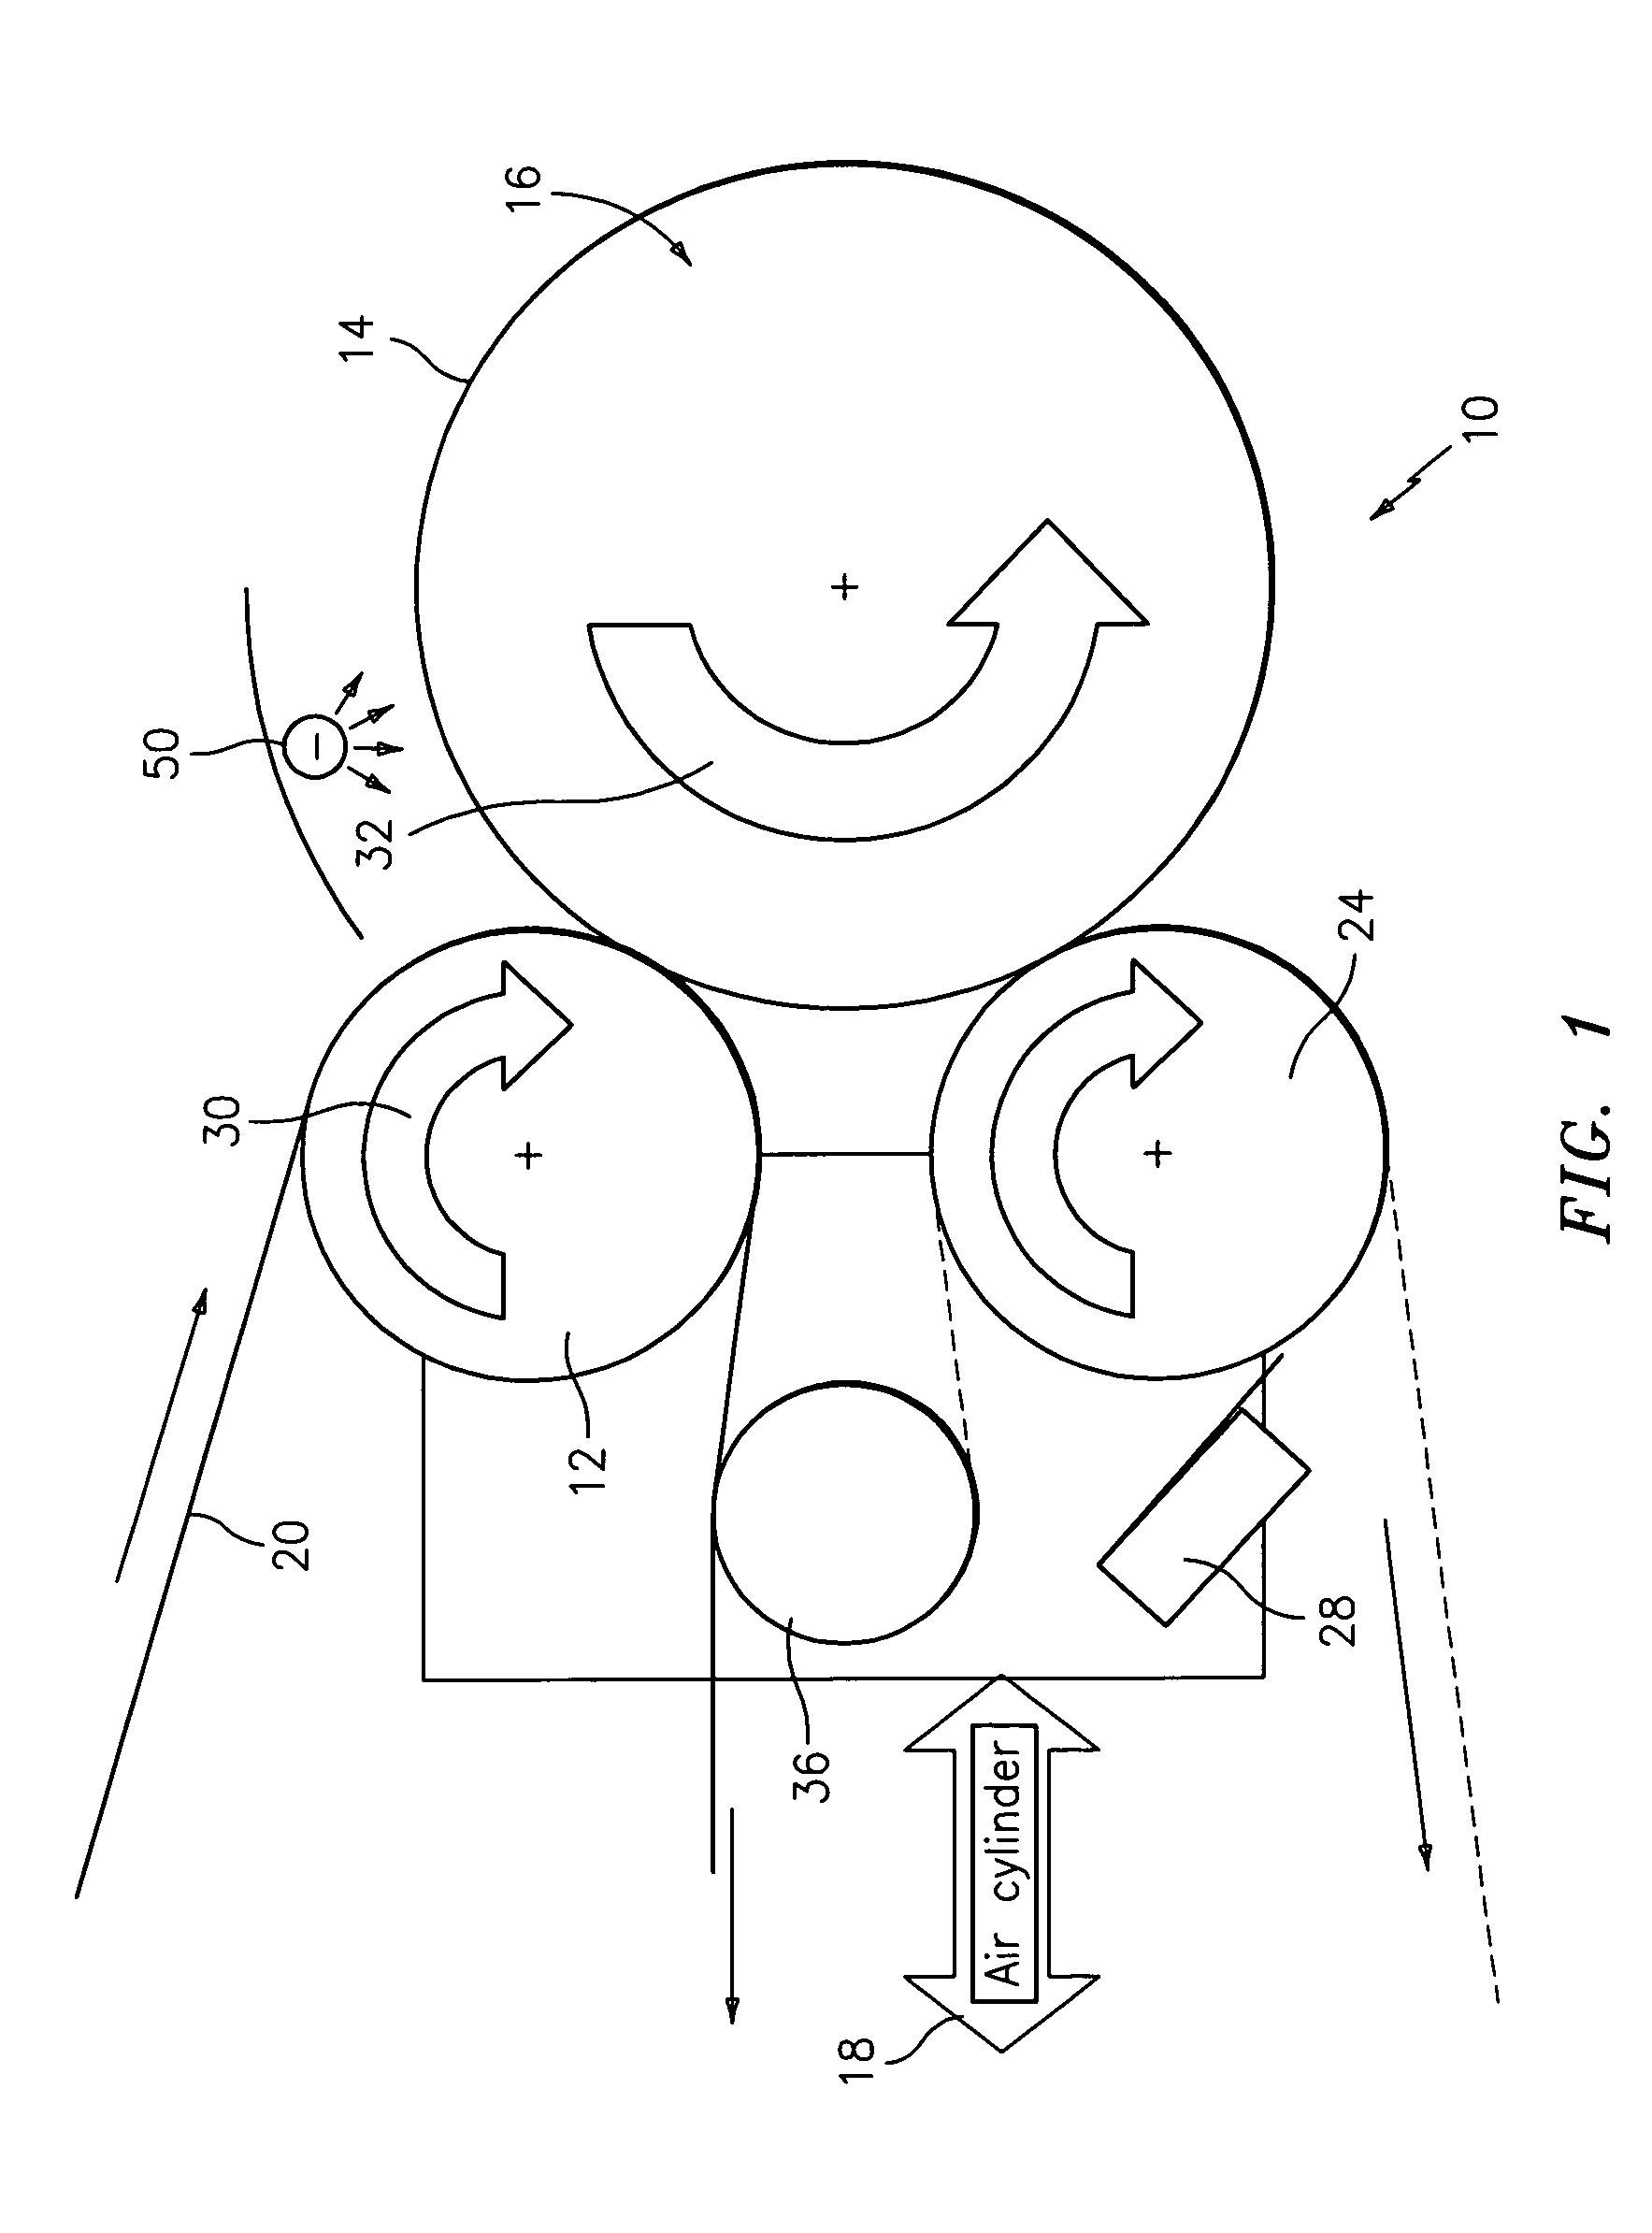 Apparatus and method for thermally developing flexographic printing elements